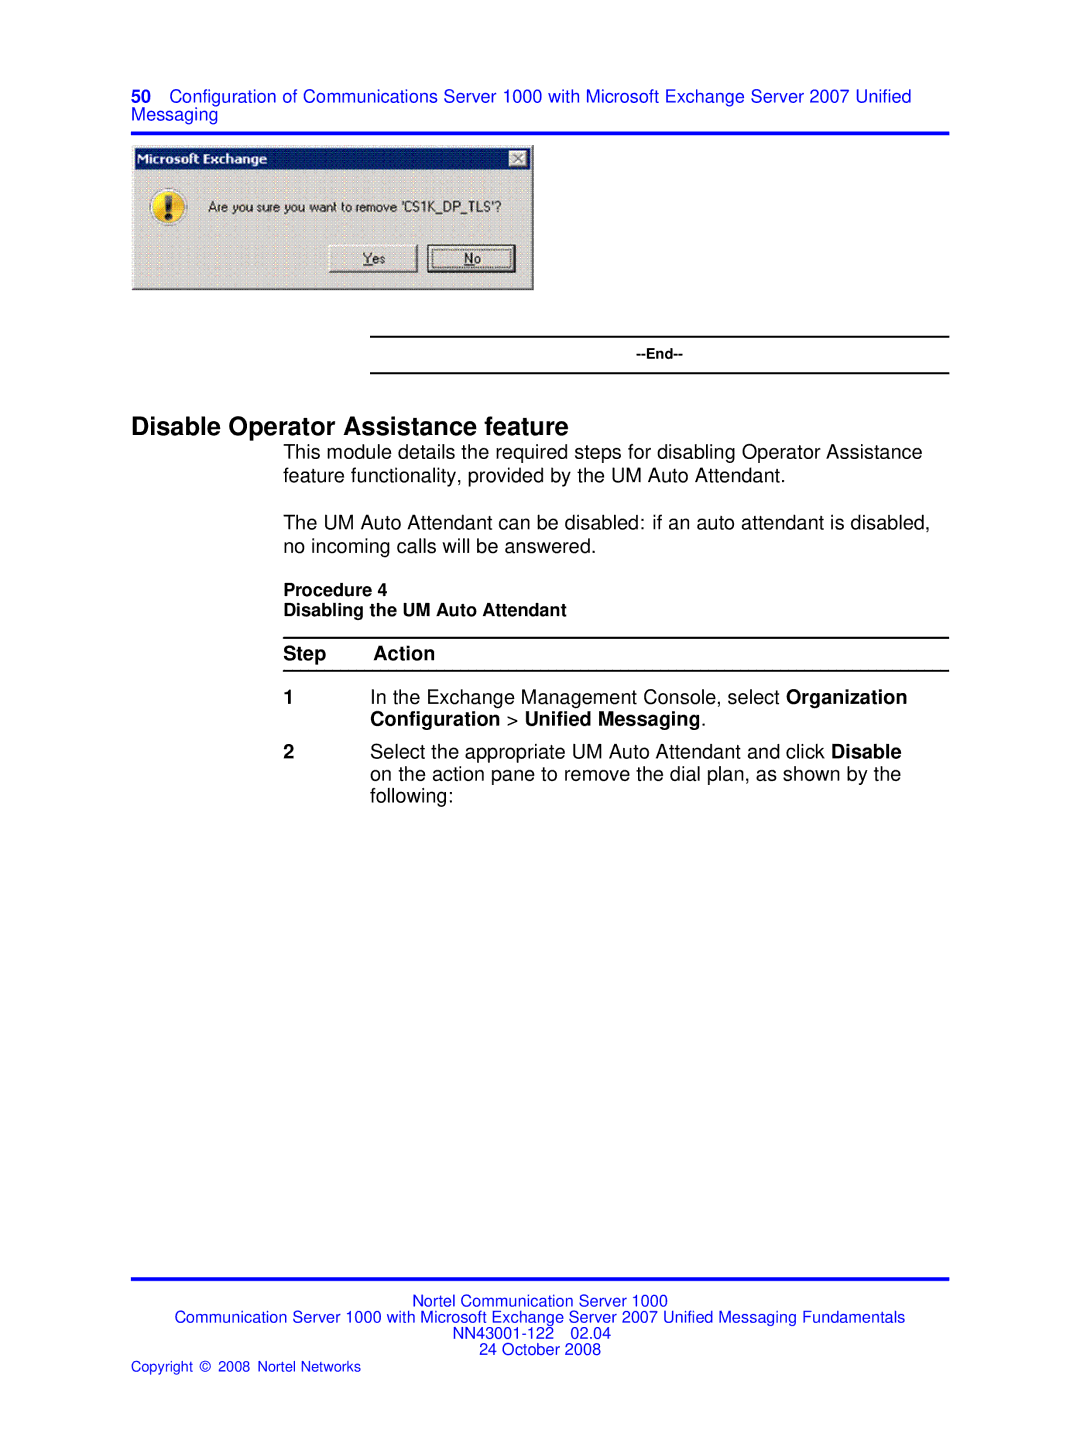 Nortel Networks NN43001-122 manual Disable Operator Assistance feature 